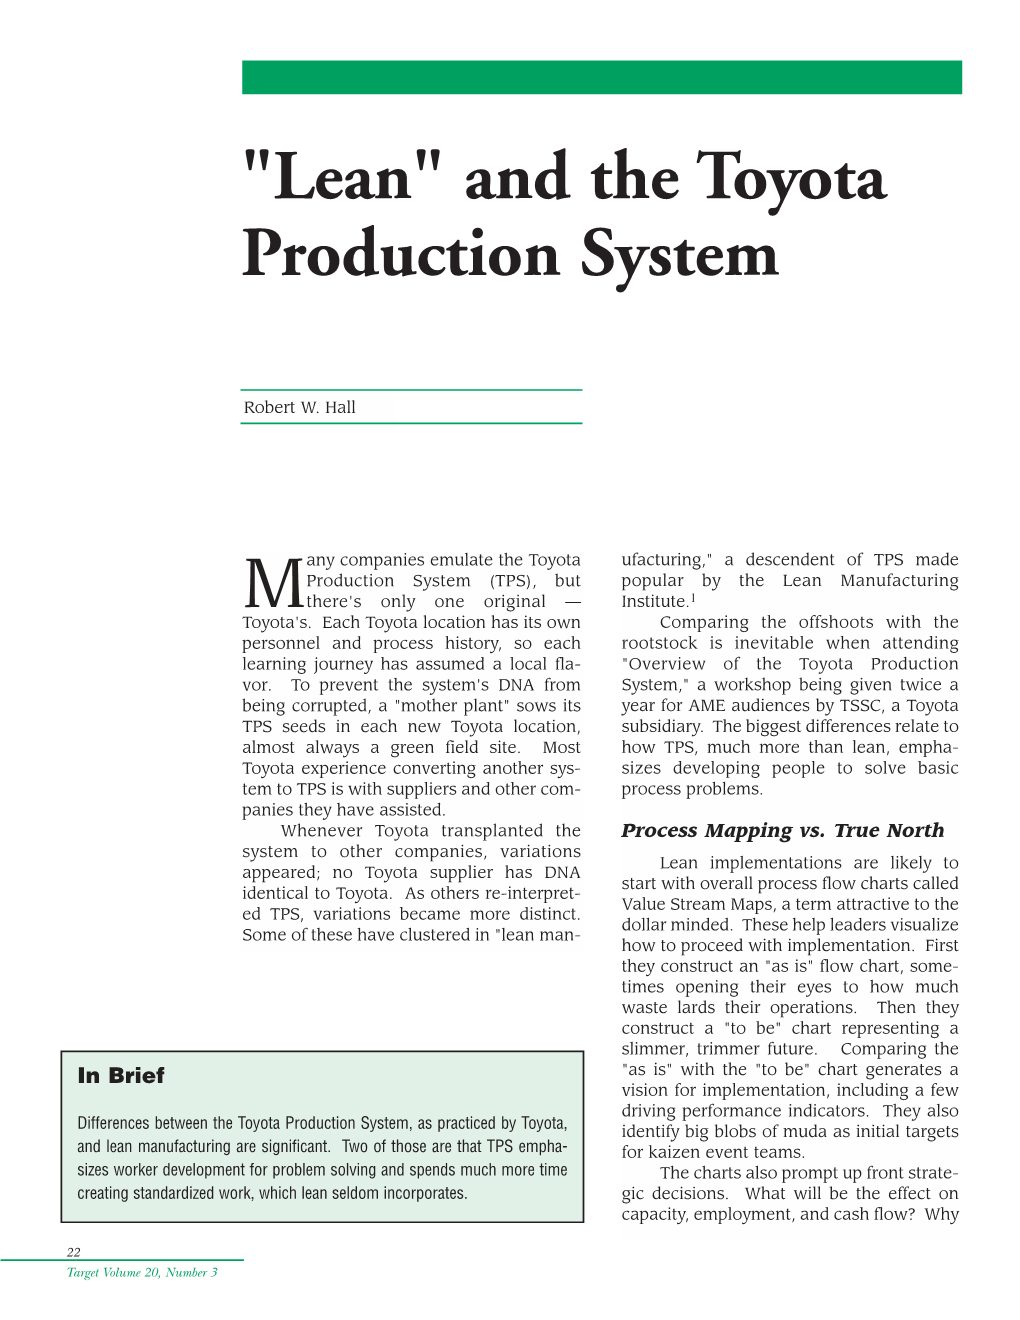 Lean and the Toyota Production System